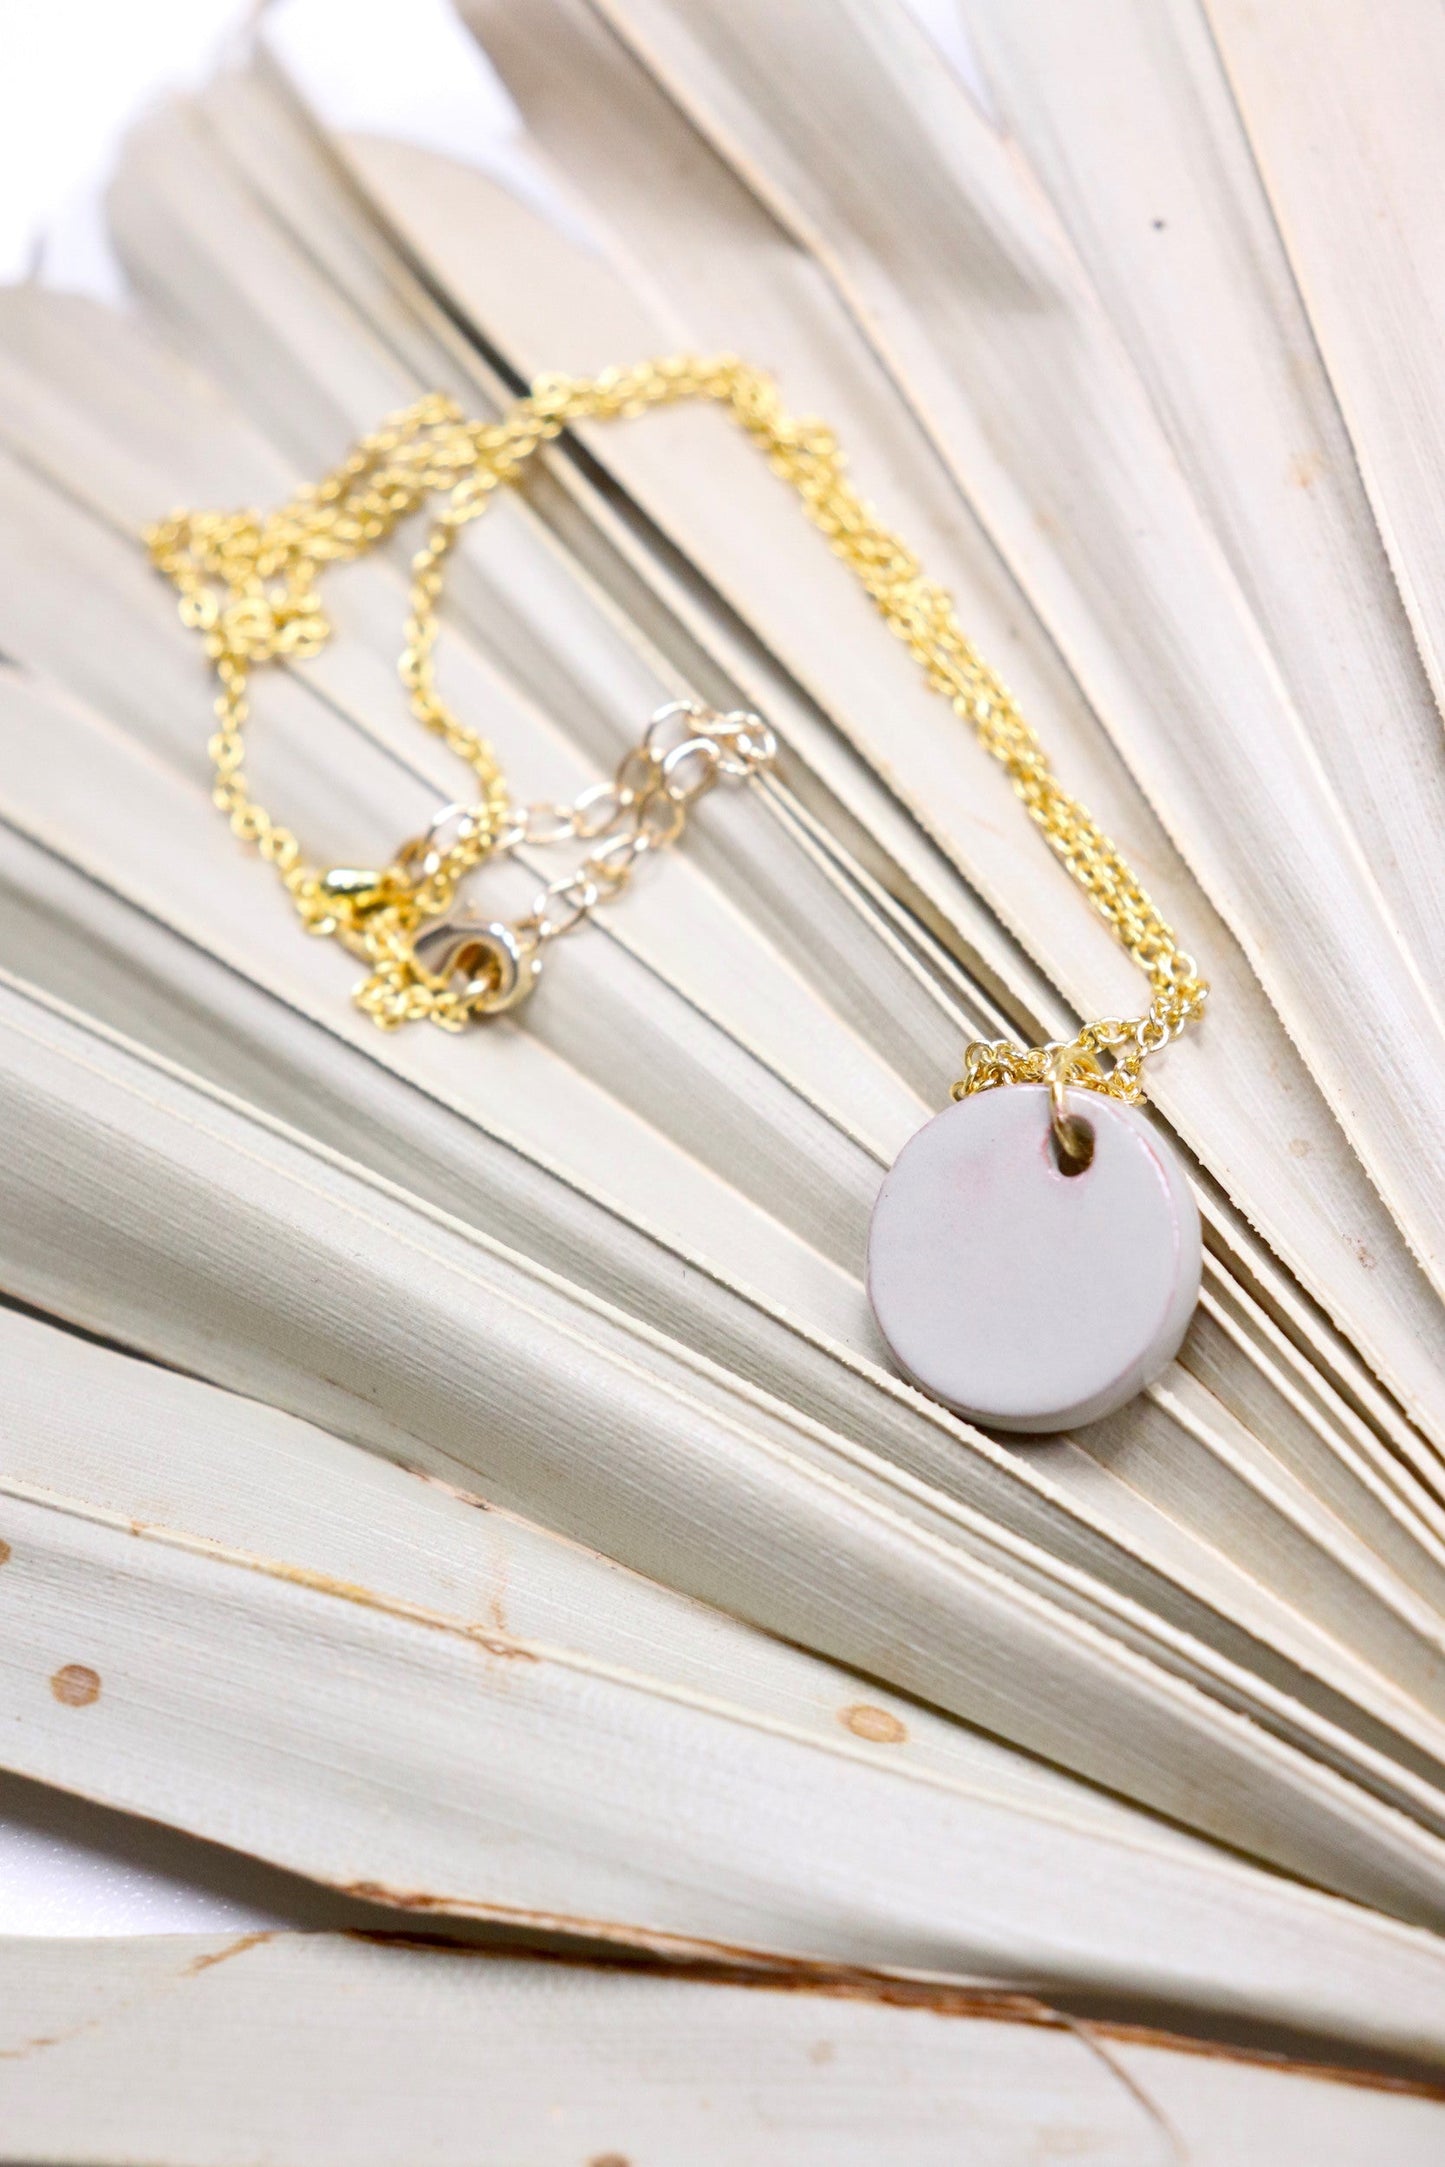 Hope Necklace - Light Grey (Ceramic and Gold)